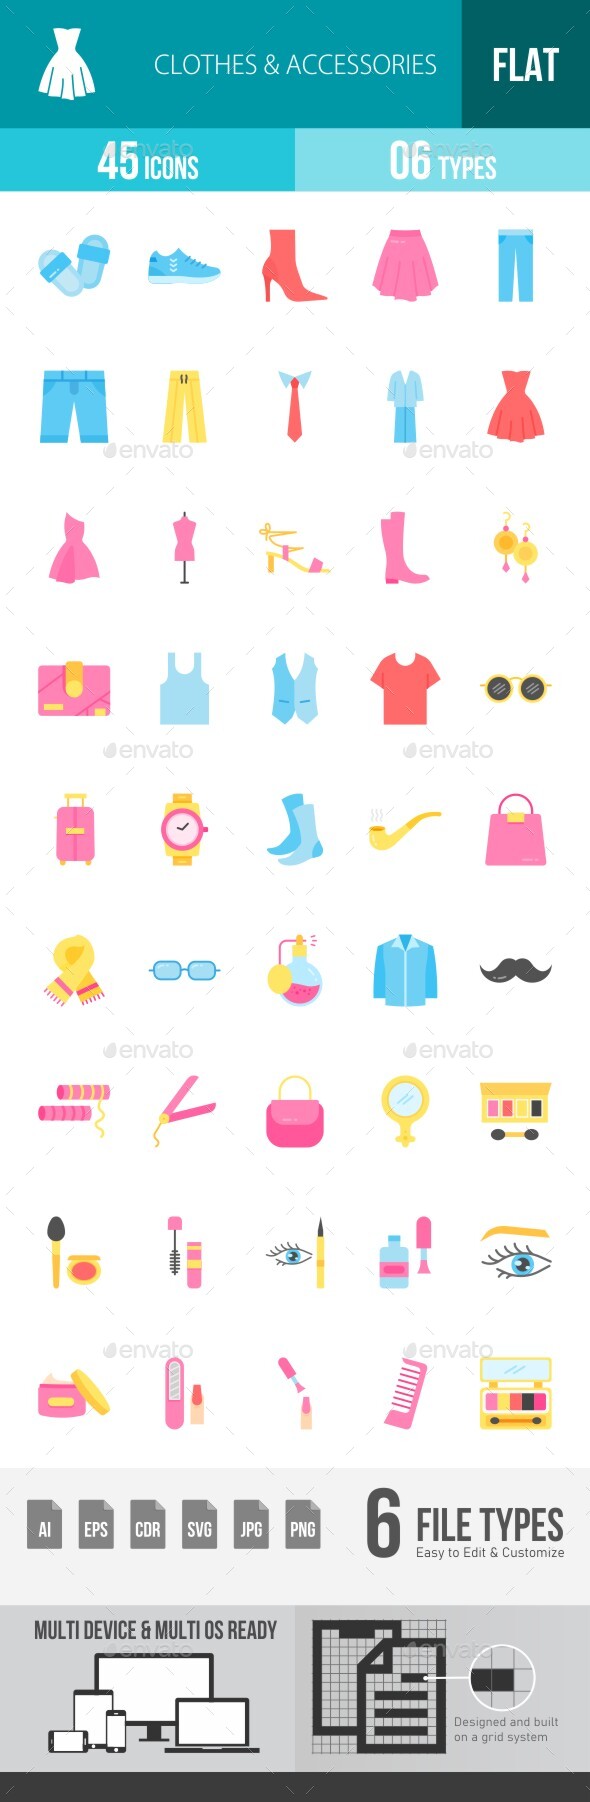 [DOWNLOAD]Clothes & Accessories Flat Multicolor Icons